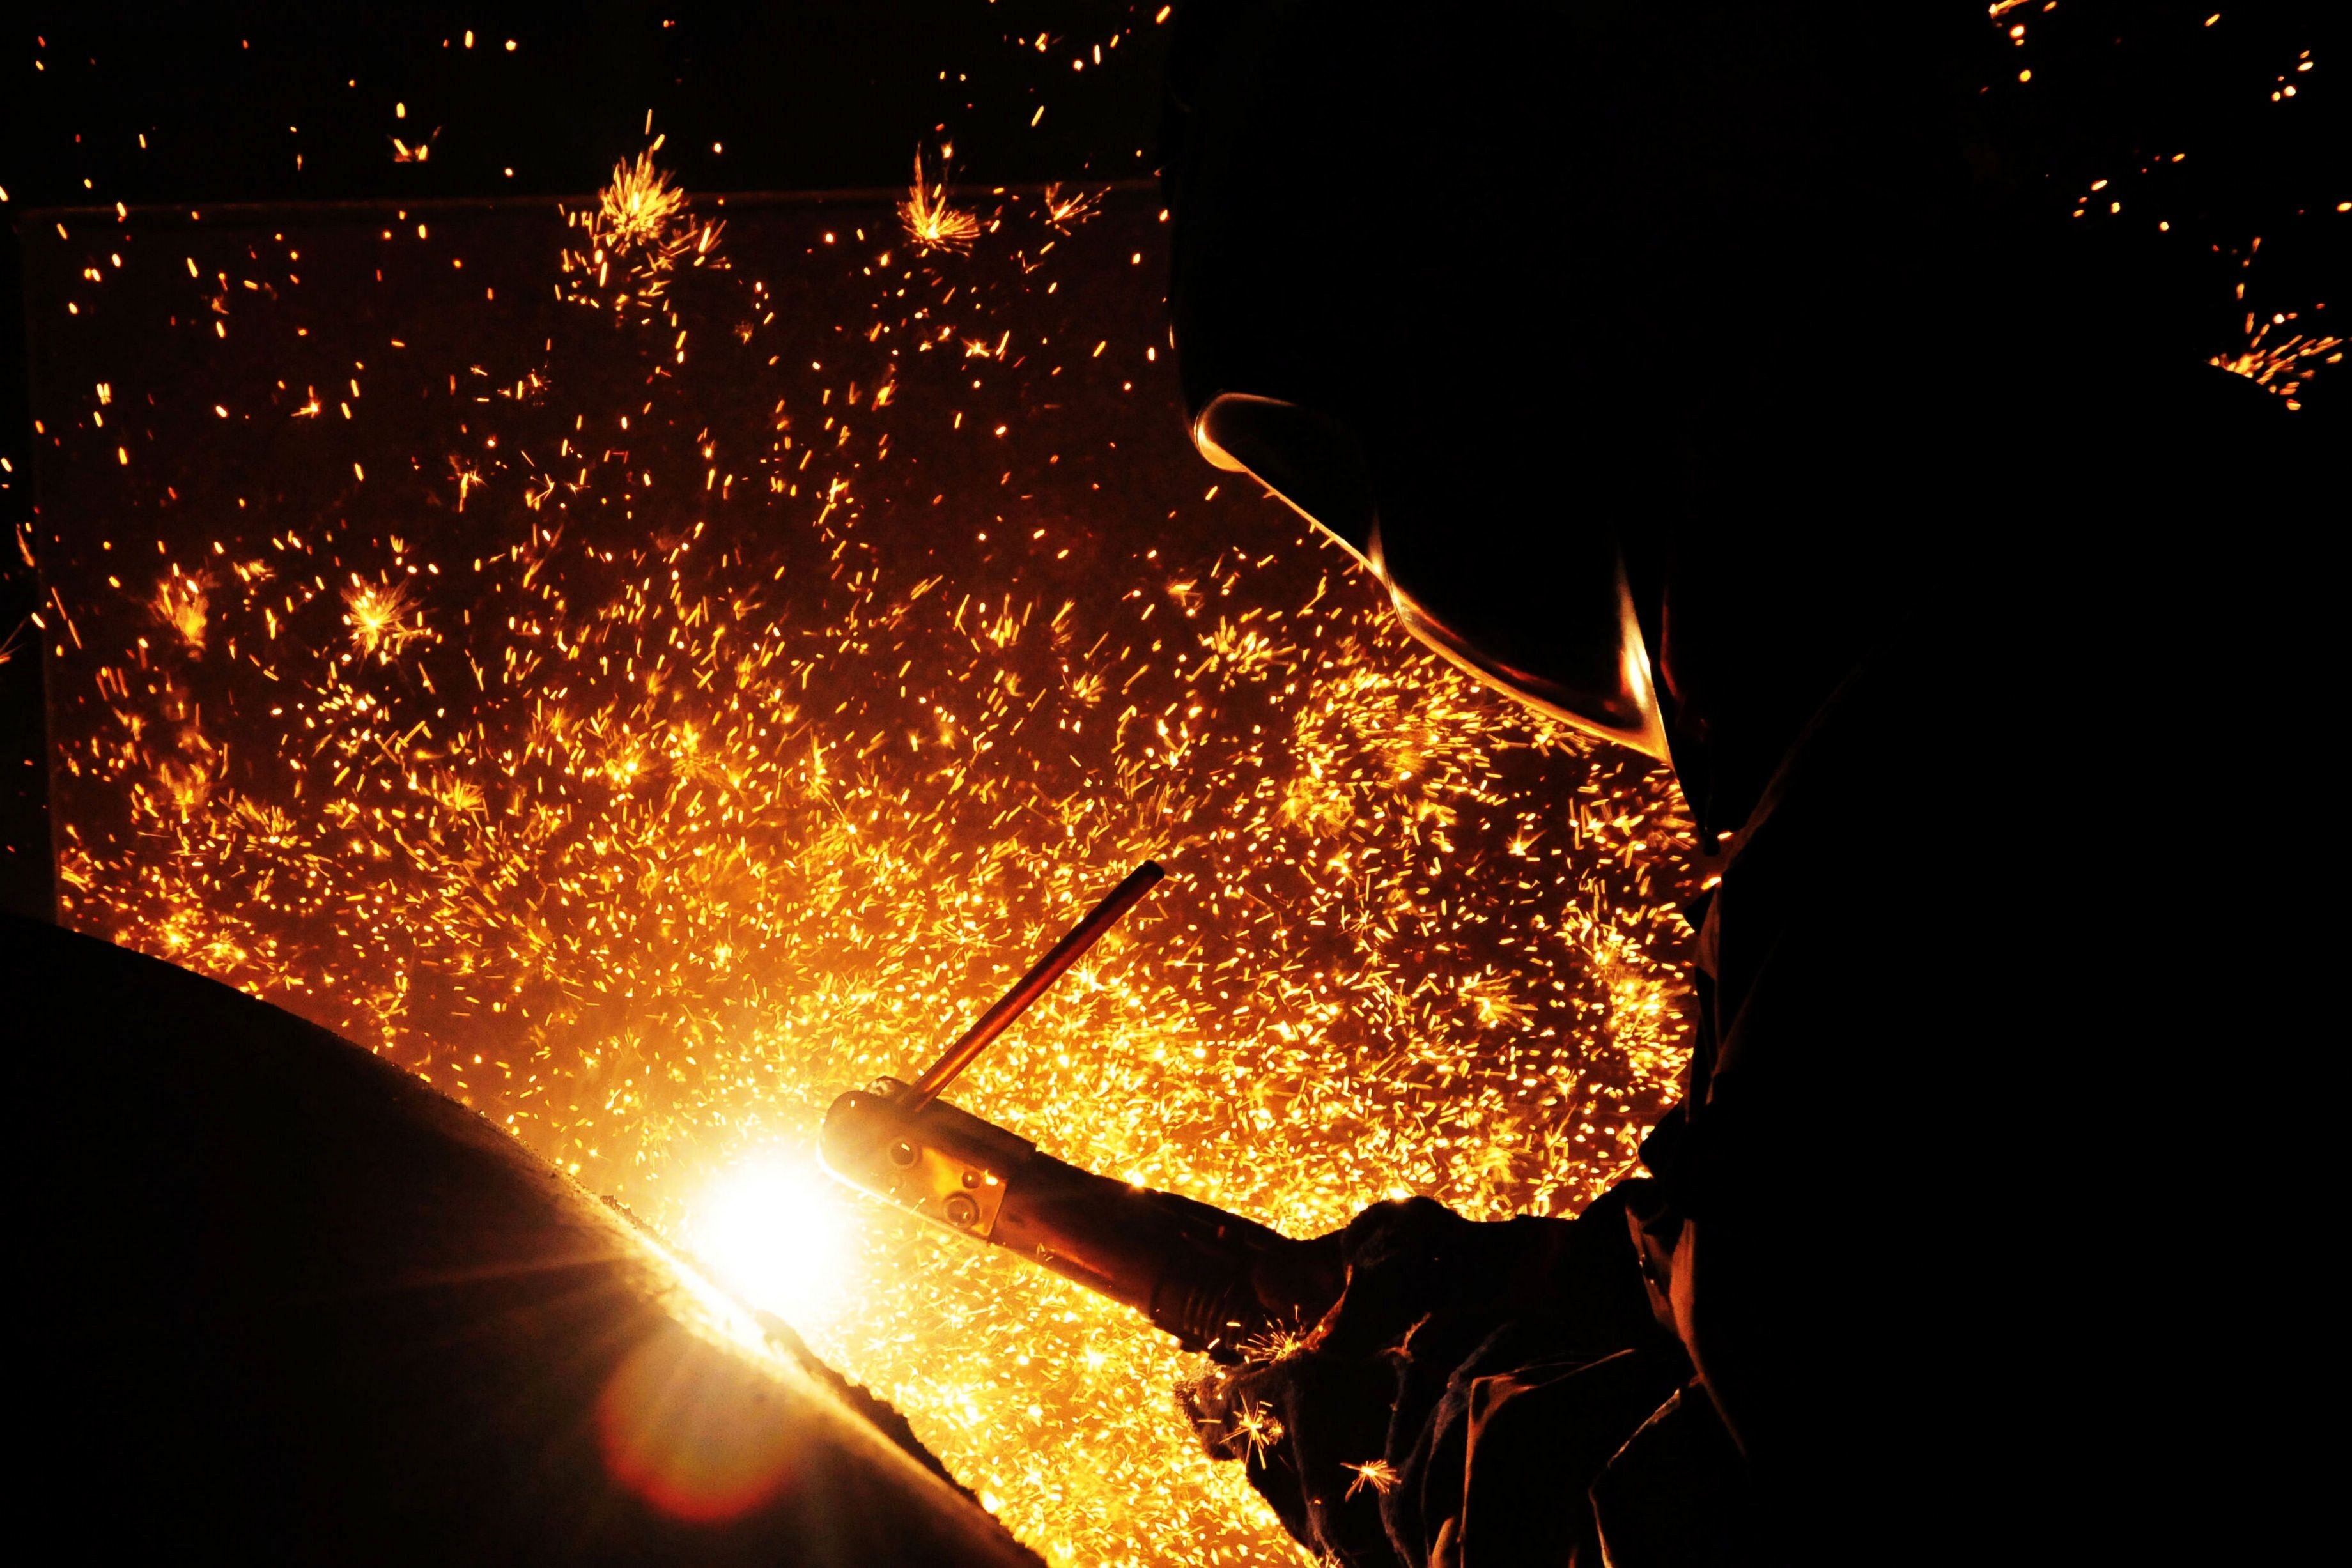 China’s crude steel output reached a record high of 1.07 billion metric tonnes last year, more than all other nations combined. Photo: AFP